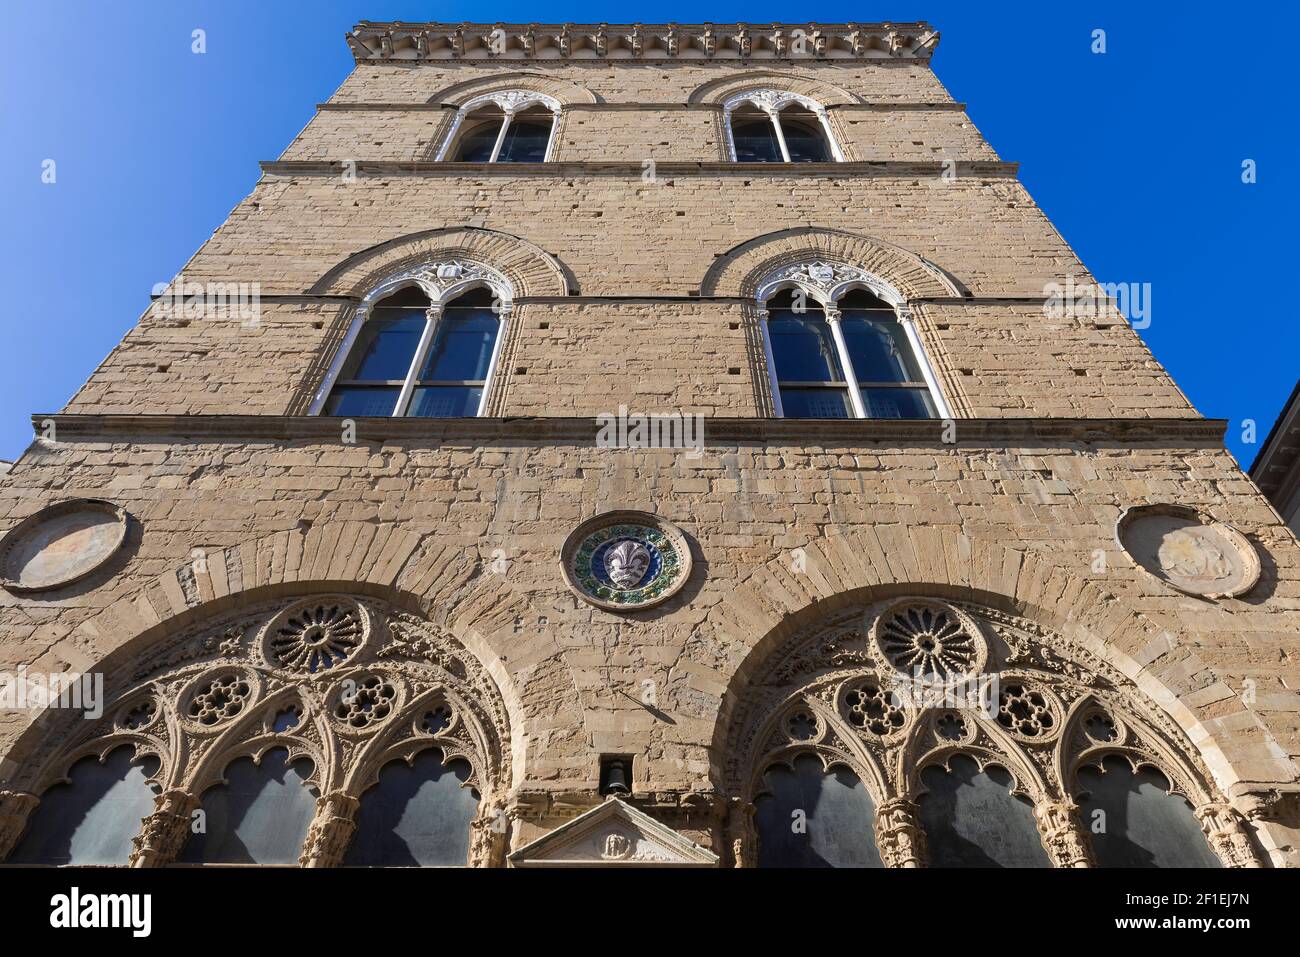 The church of Orsanmichele, formerly also known as the church of San Michele in Orto, is located in Florence and was originally a loggia built for the Stock Photo